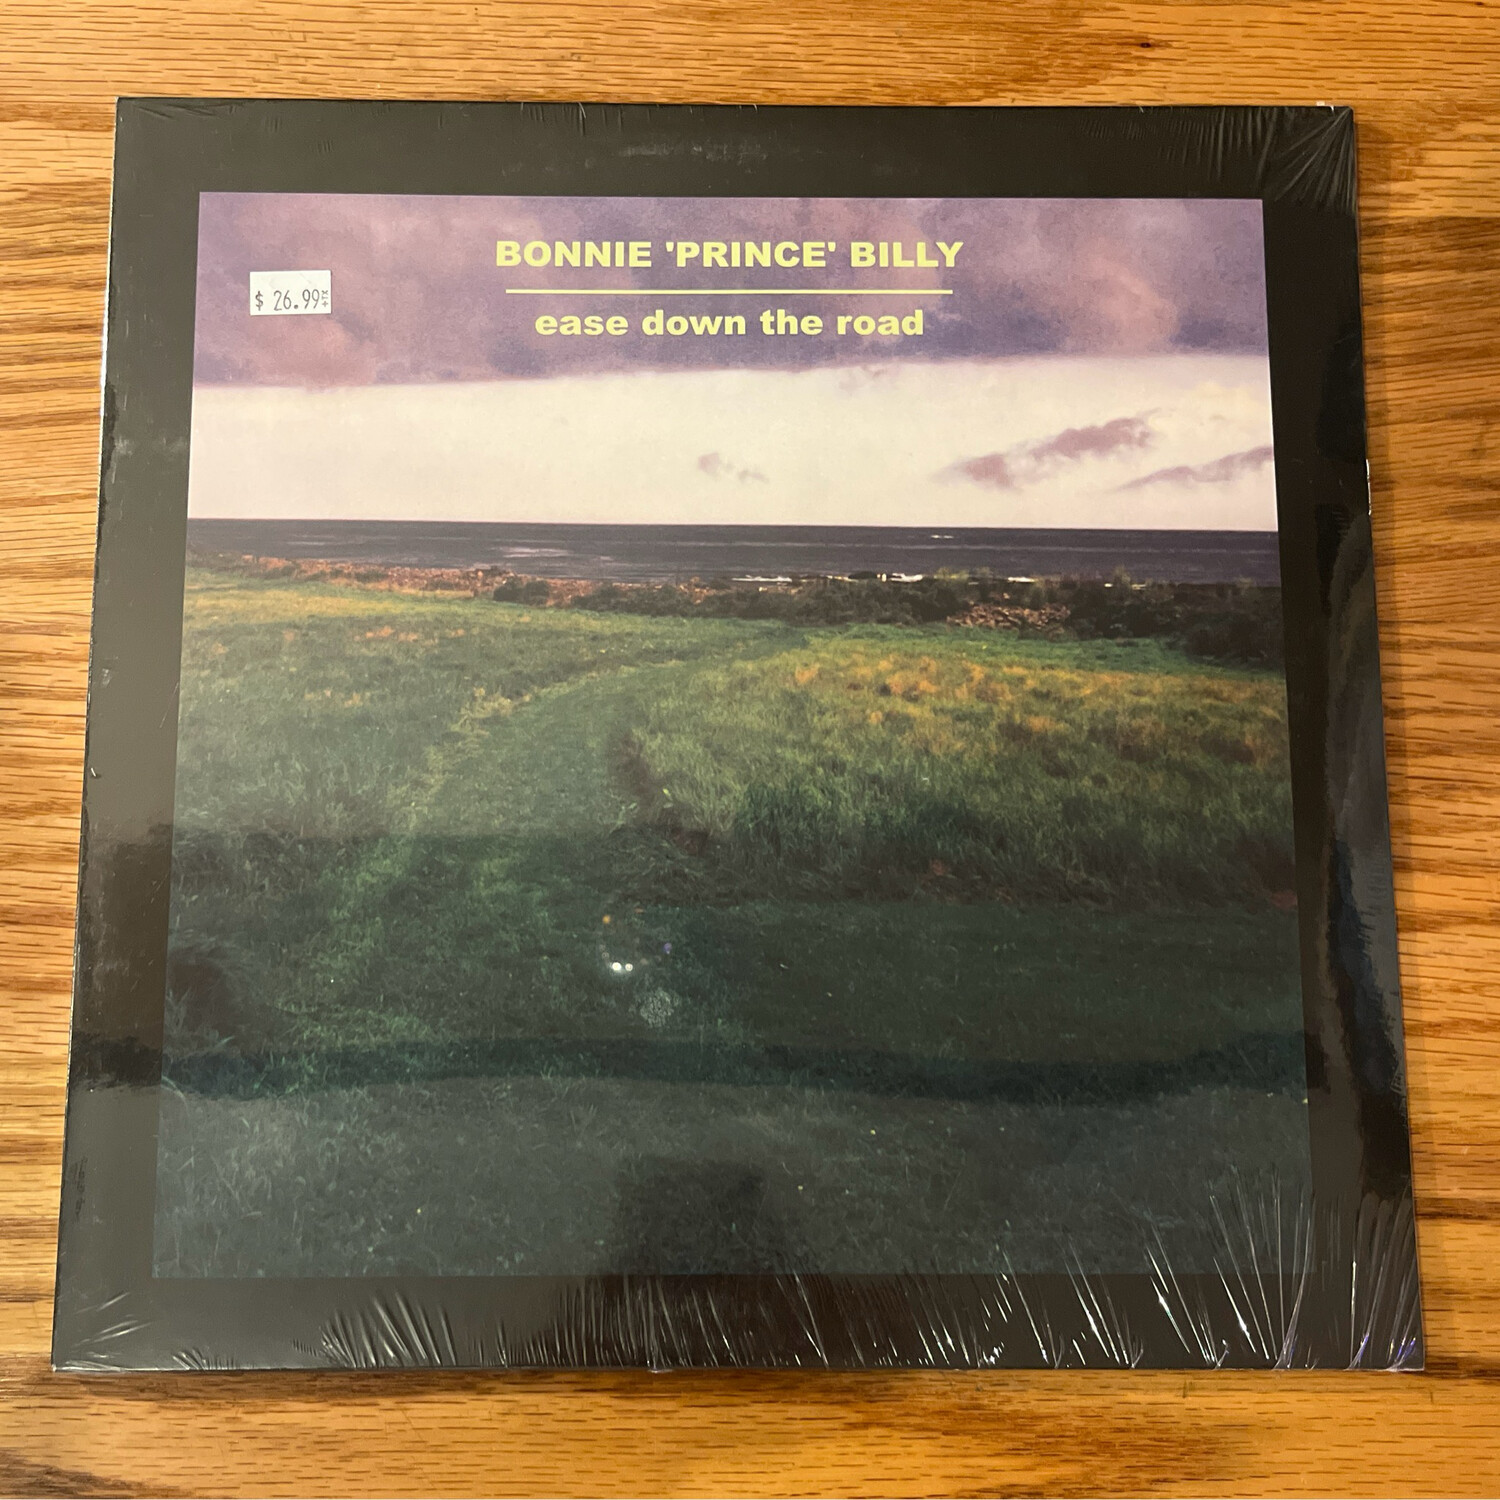 Bonnie ‘Prince’ Billy “ease down the road”